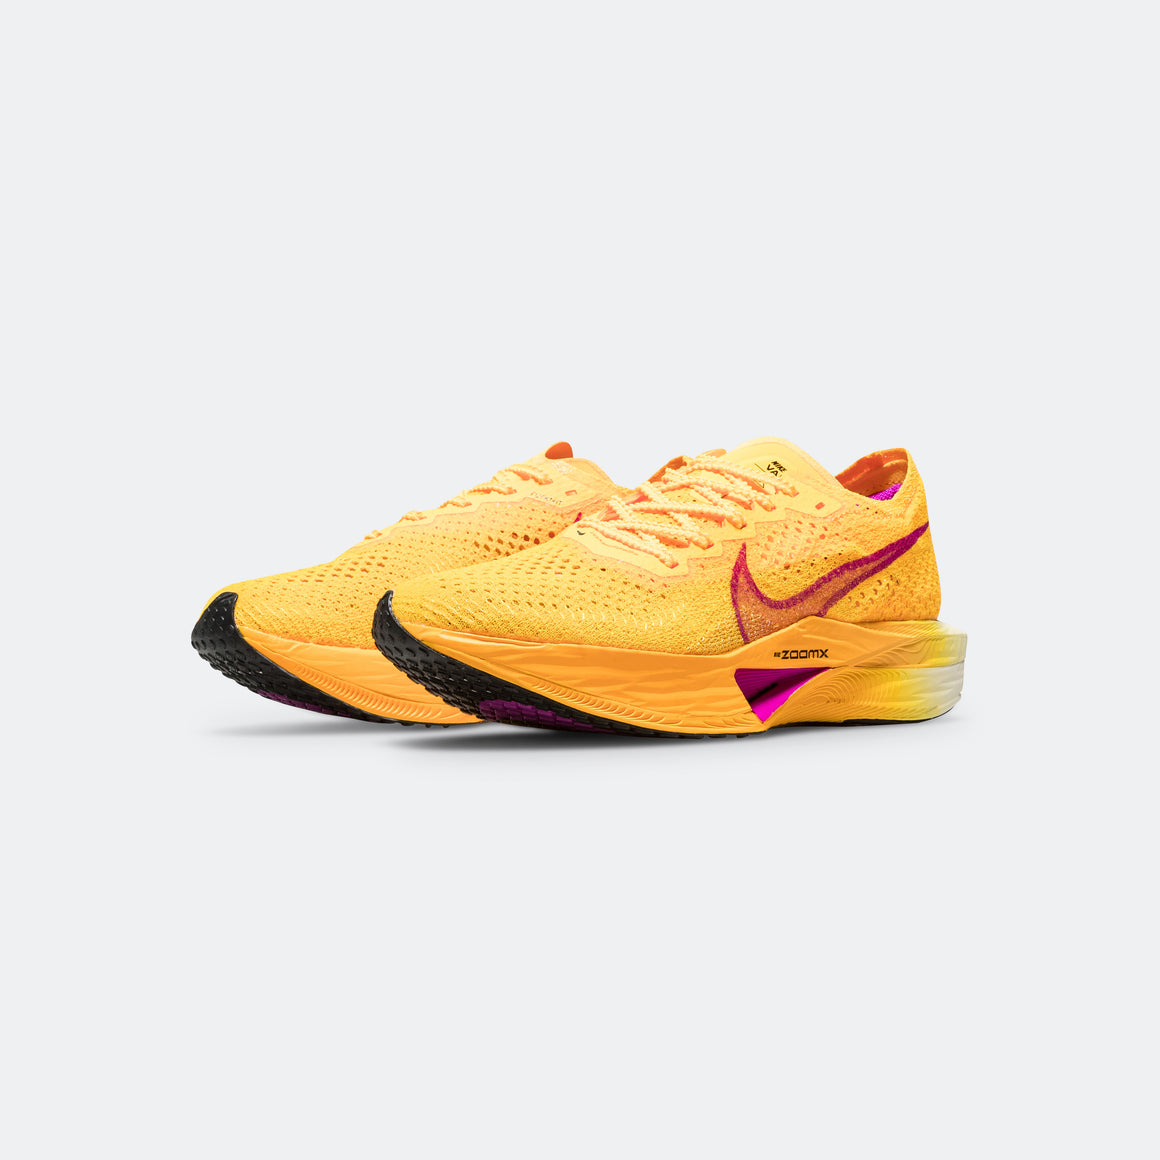 Nike - Womens ZoomX Vaporfly Next% 3 - Laser Orange/Hyper Violet - Up There Athletics